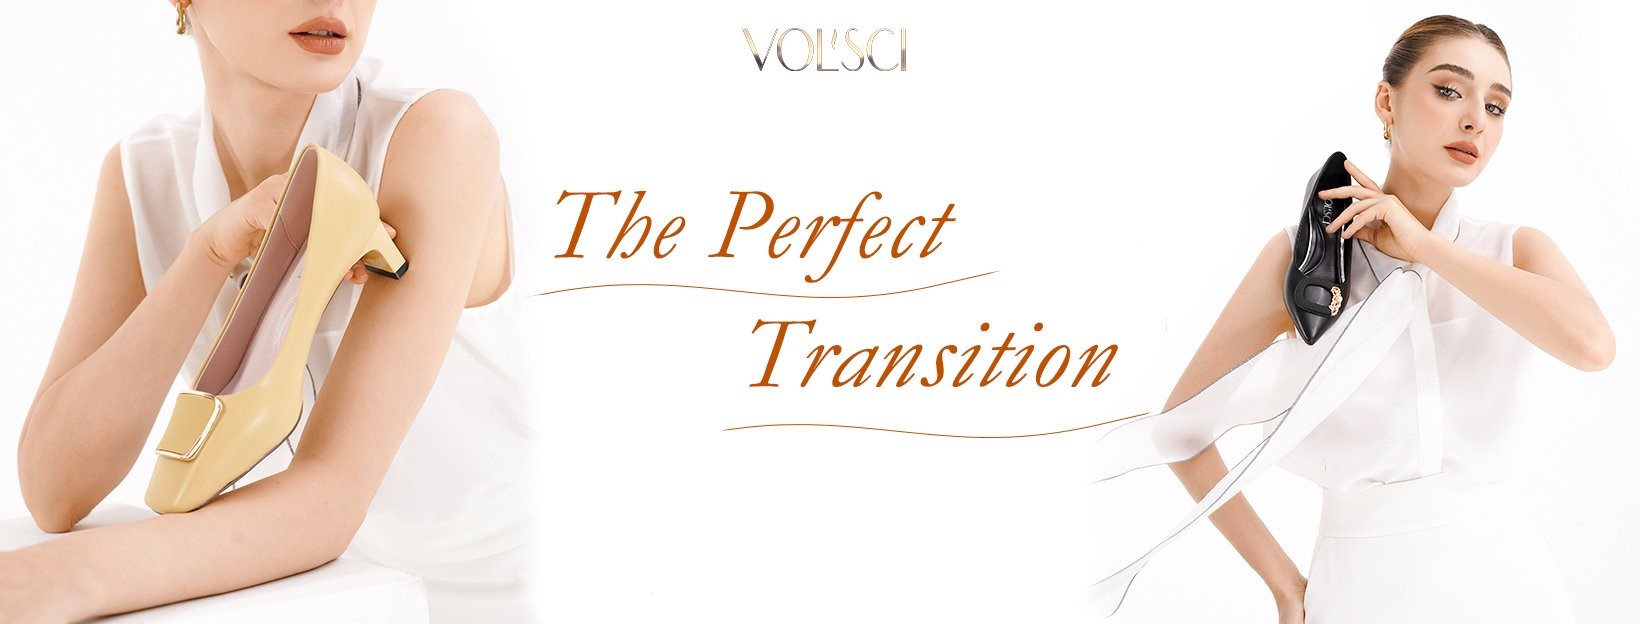 THE PERFECT TRANSITION | UYỂN CHUYỂN